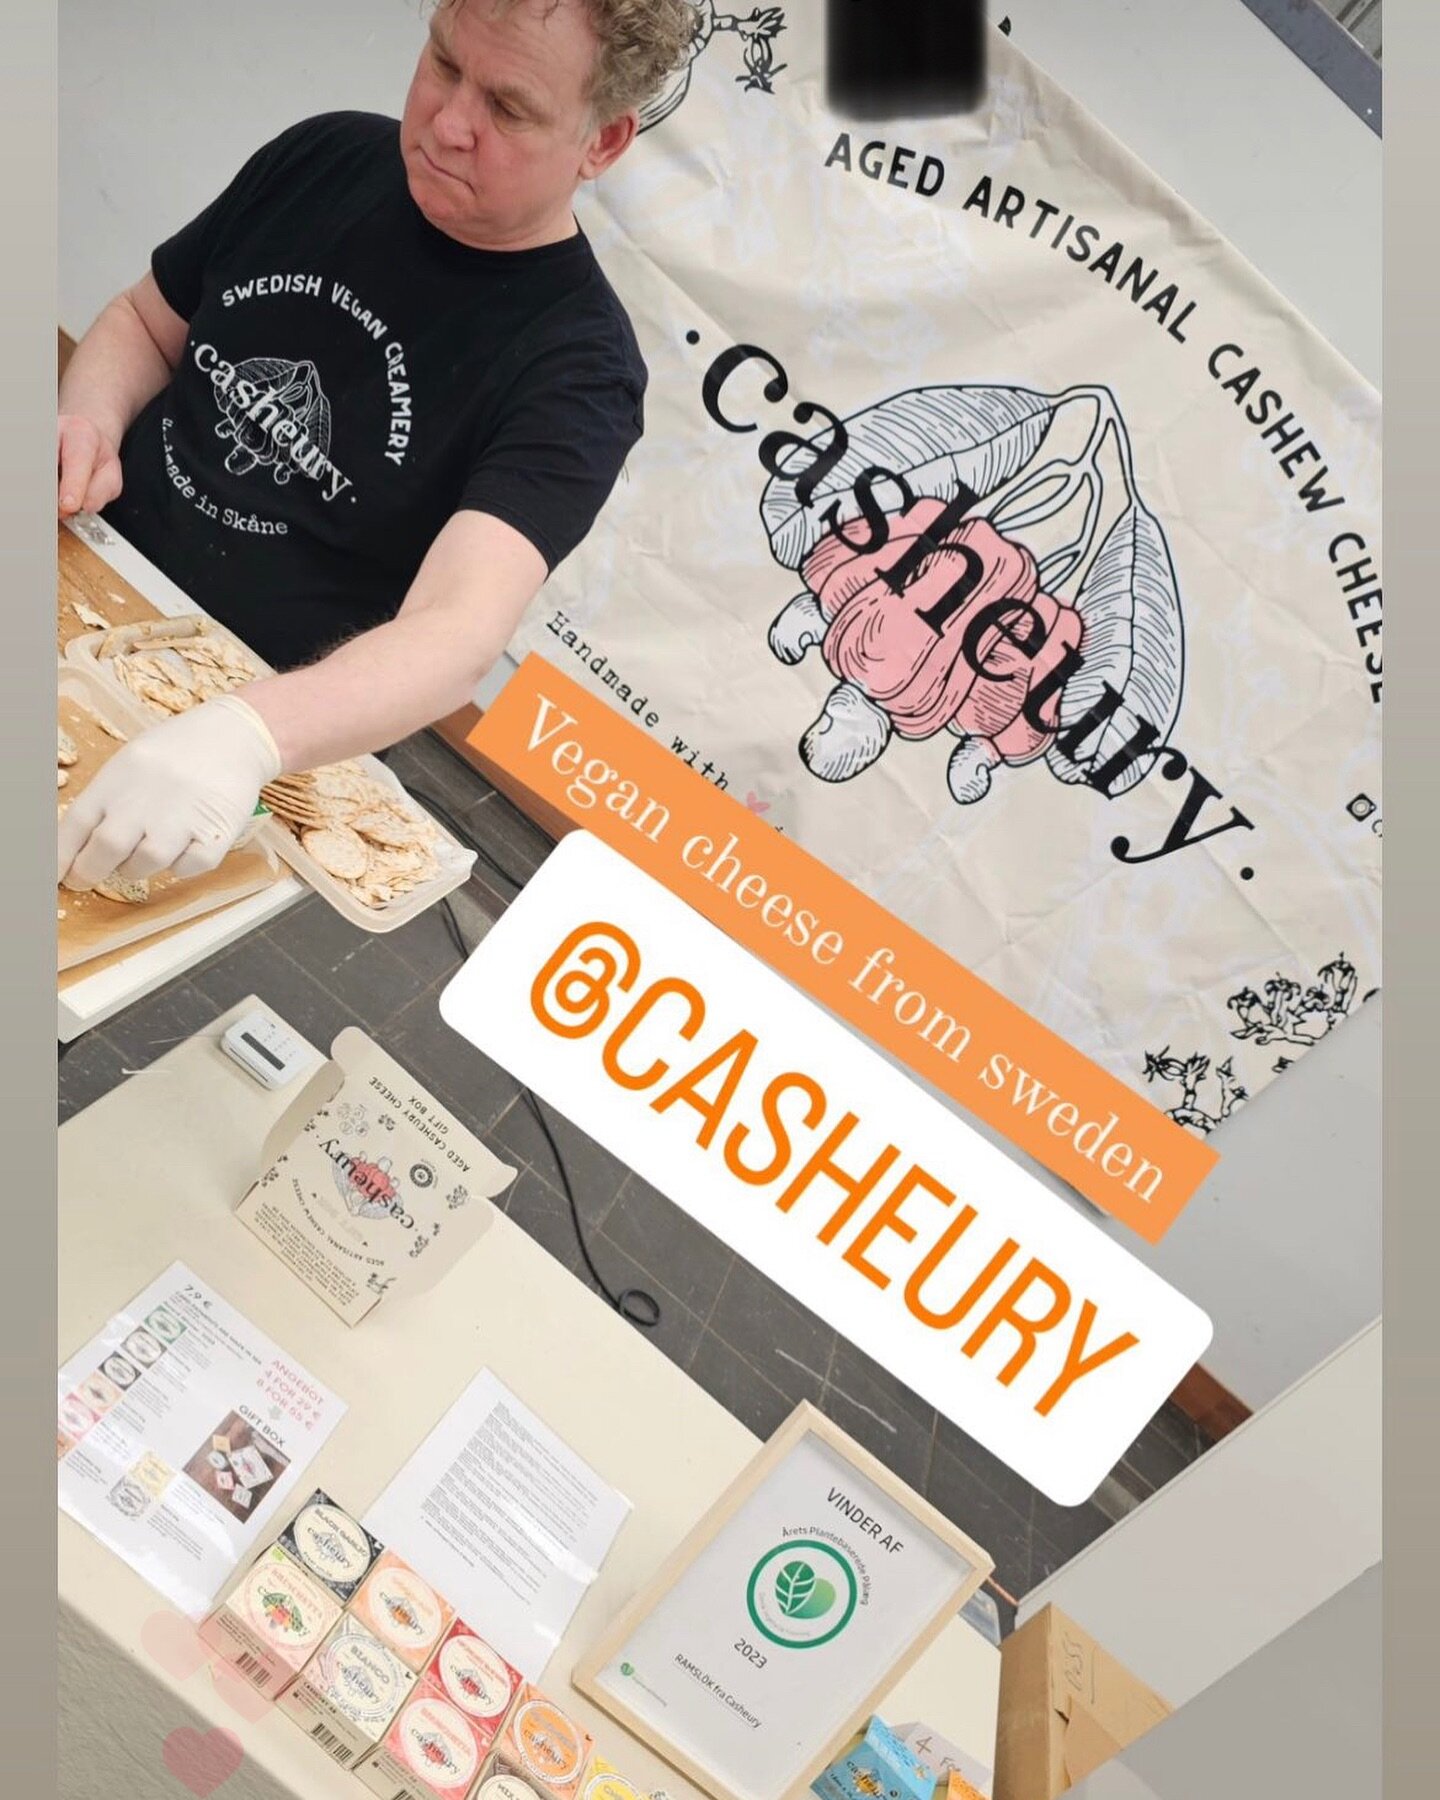 Today you can find us on the last day of the fair at @officialveggieworld in Dūsseldorf
You can taste and buy all our Casheuries at stand A3.
Yesterday was crazy and we are going early today to restock the fridges ready for the rush.

We are slowly i